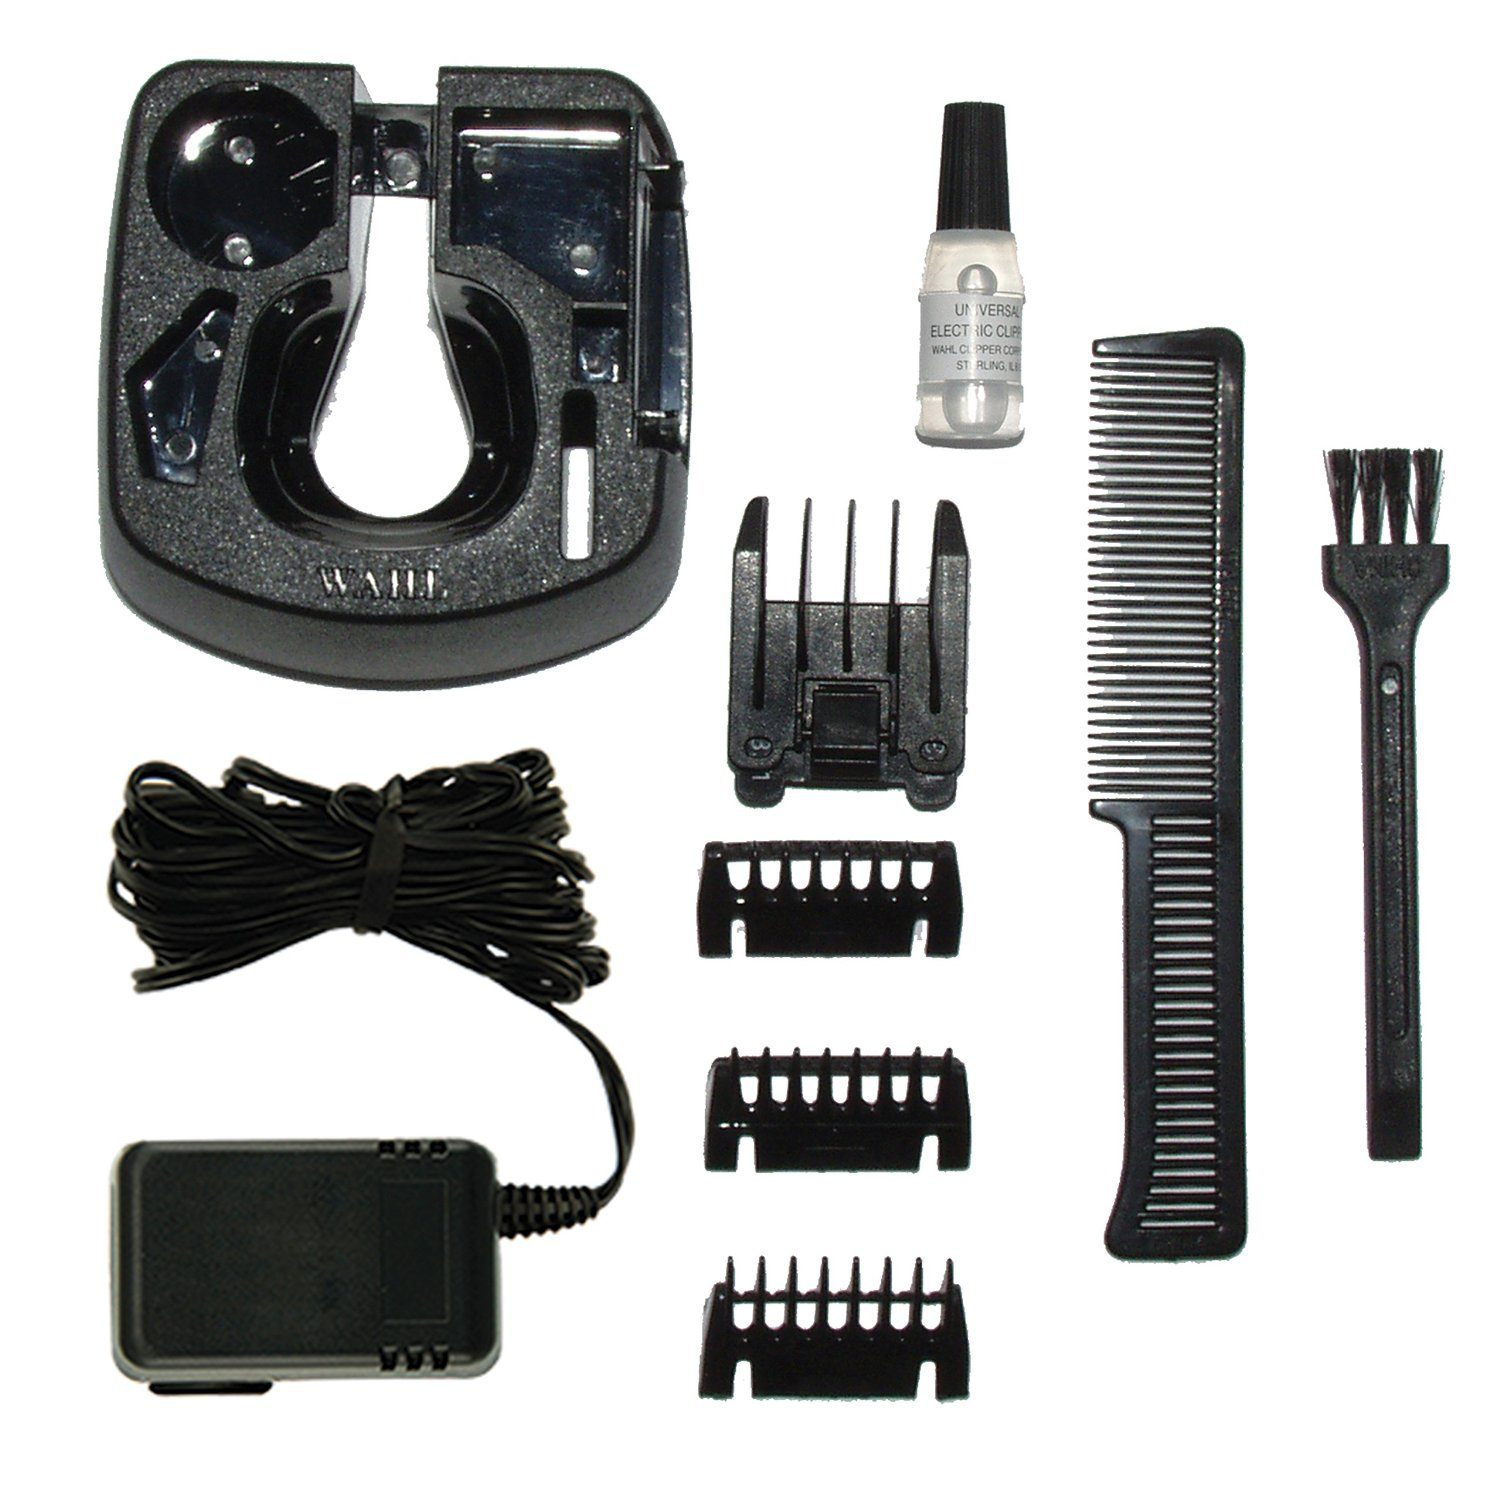 Wahl 9916 contents